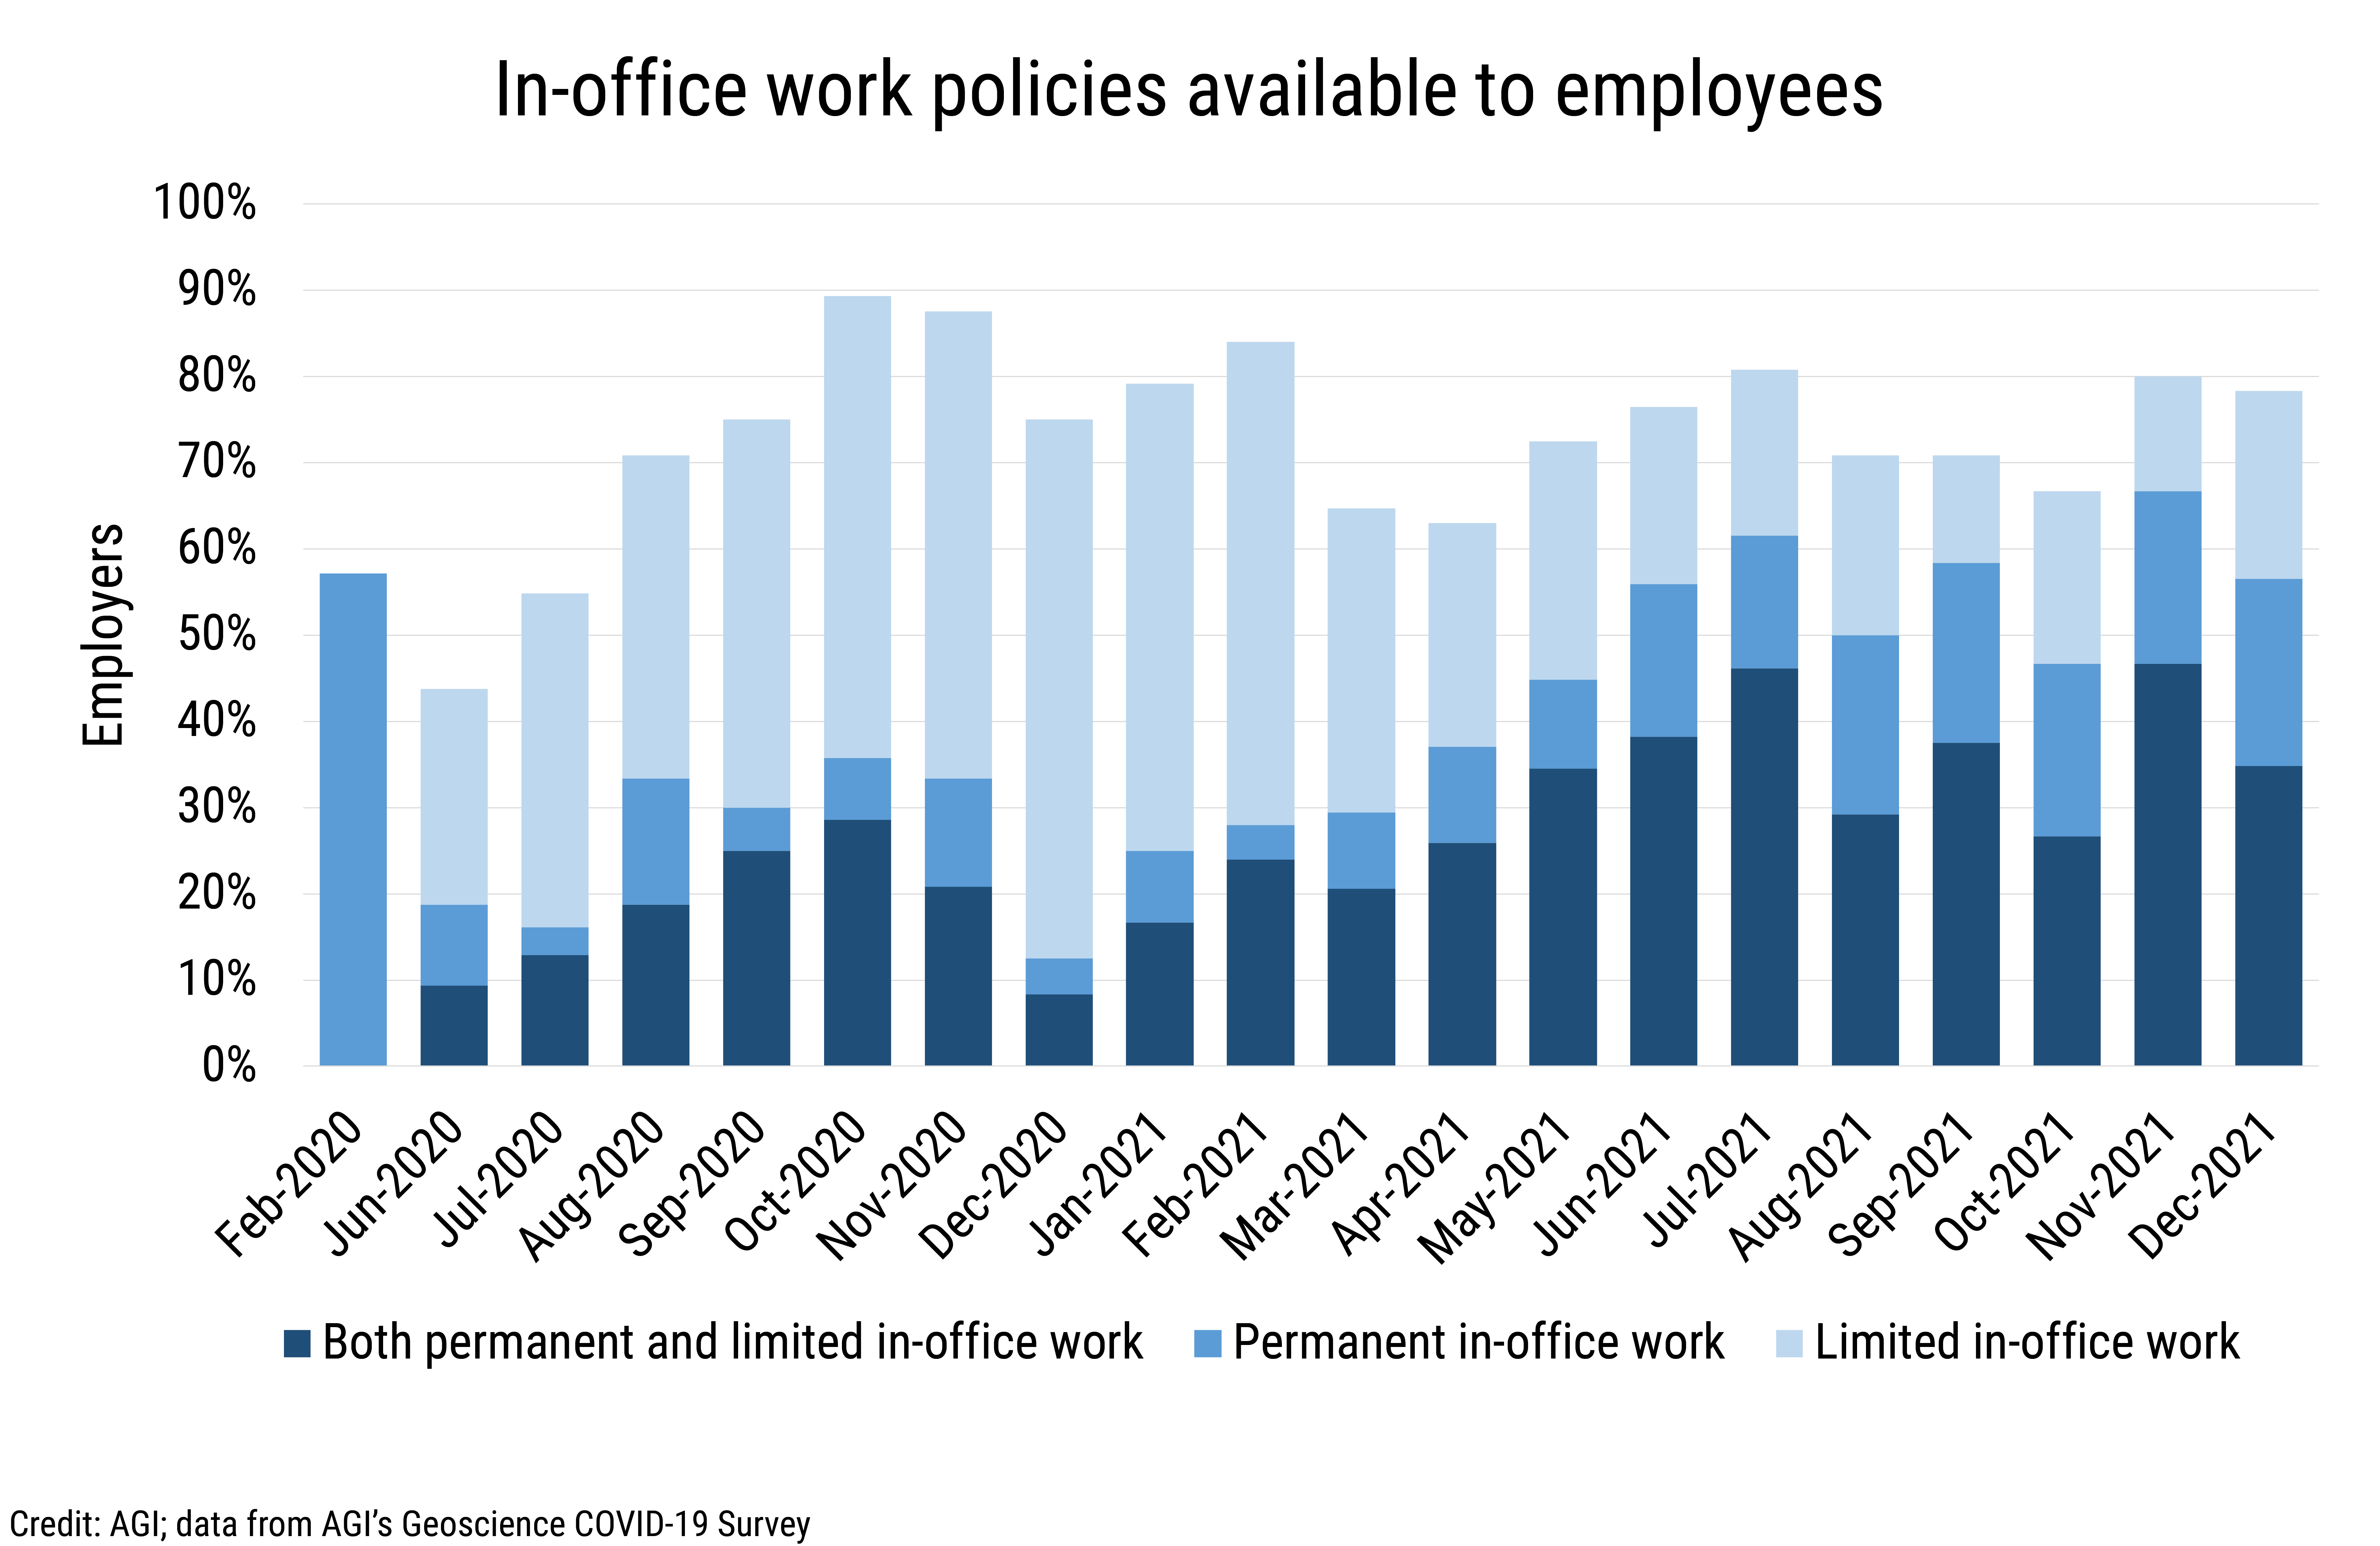 DB_2022-003 chart 06: In-office workplace policies available to employees(Credit: AGI; data from AGI's Geoscience COVID-19 Survey)